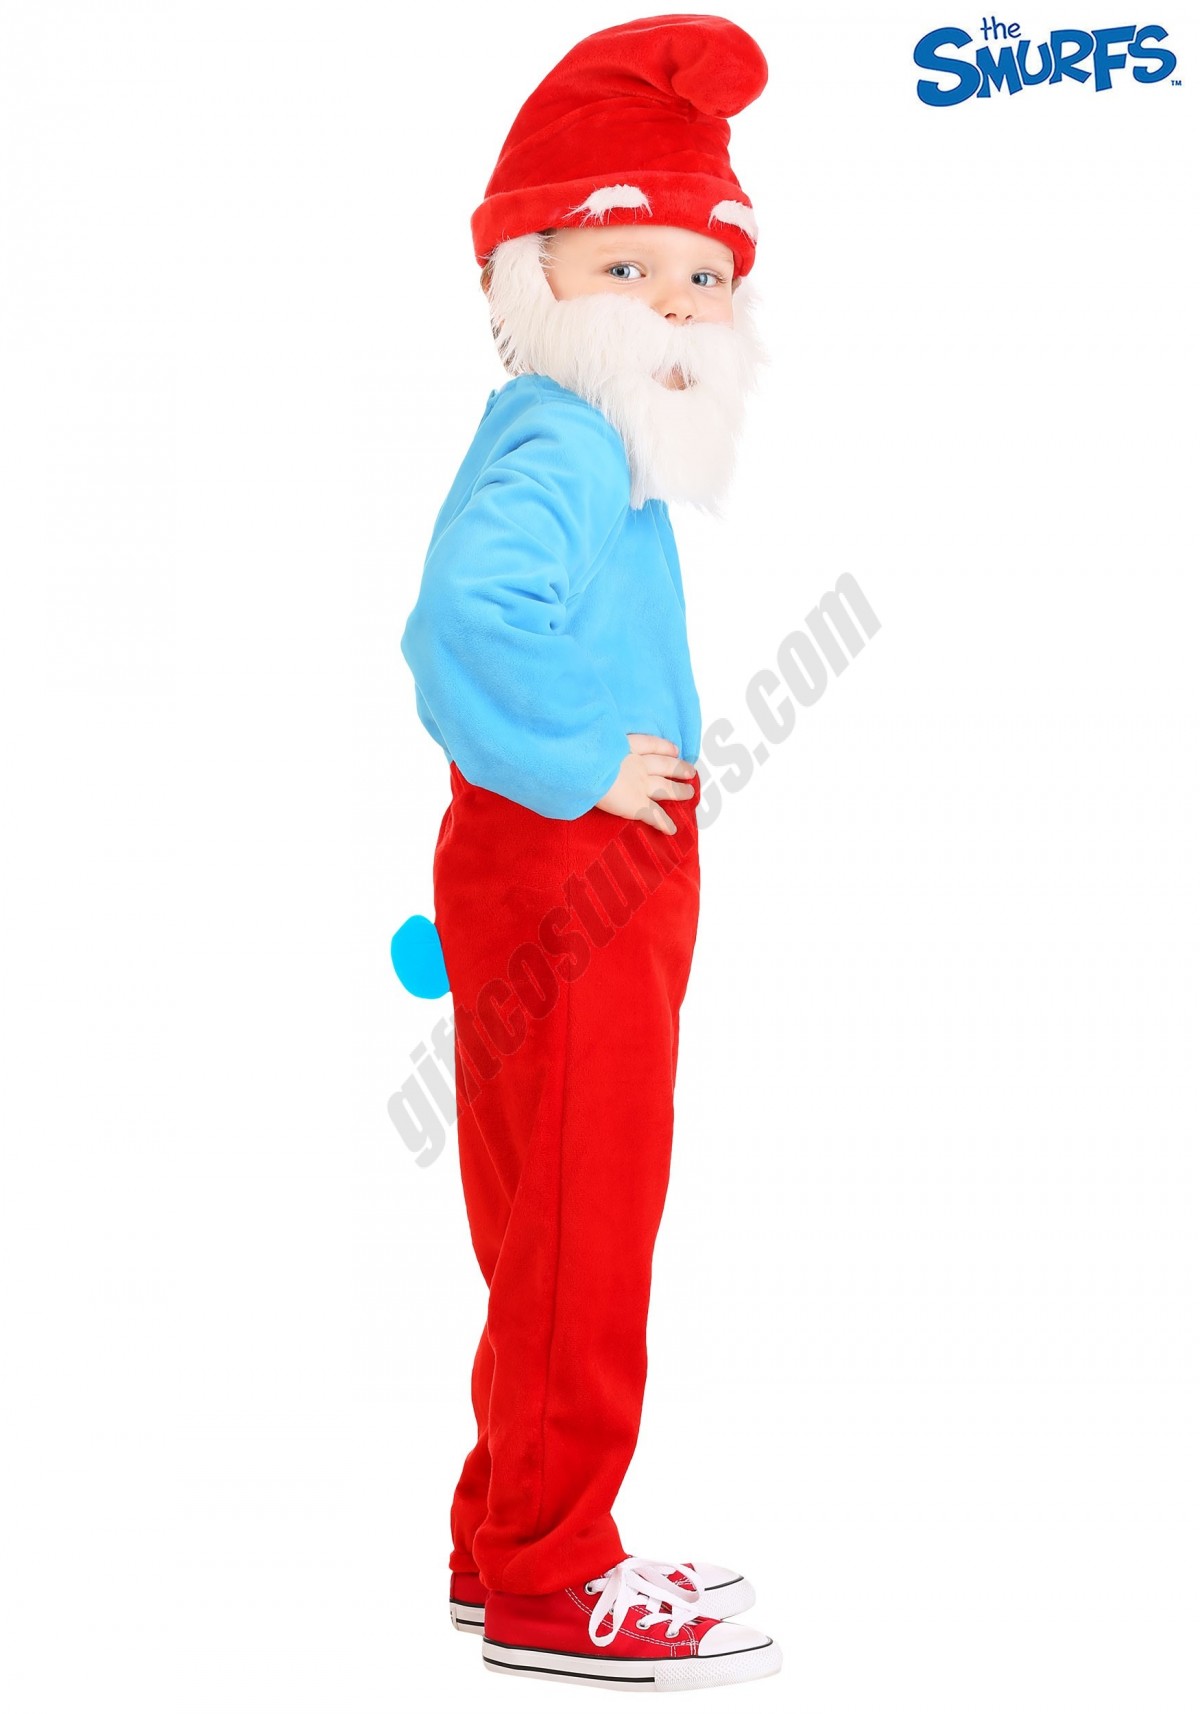 The Smurfs Toddler Papa Smurf Costume Promotions - -1